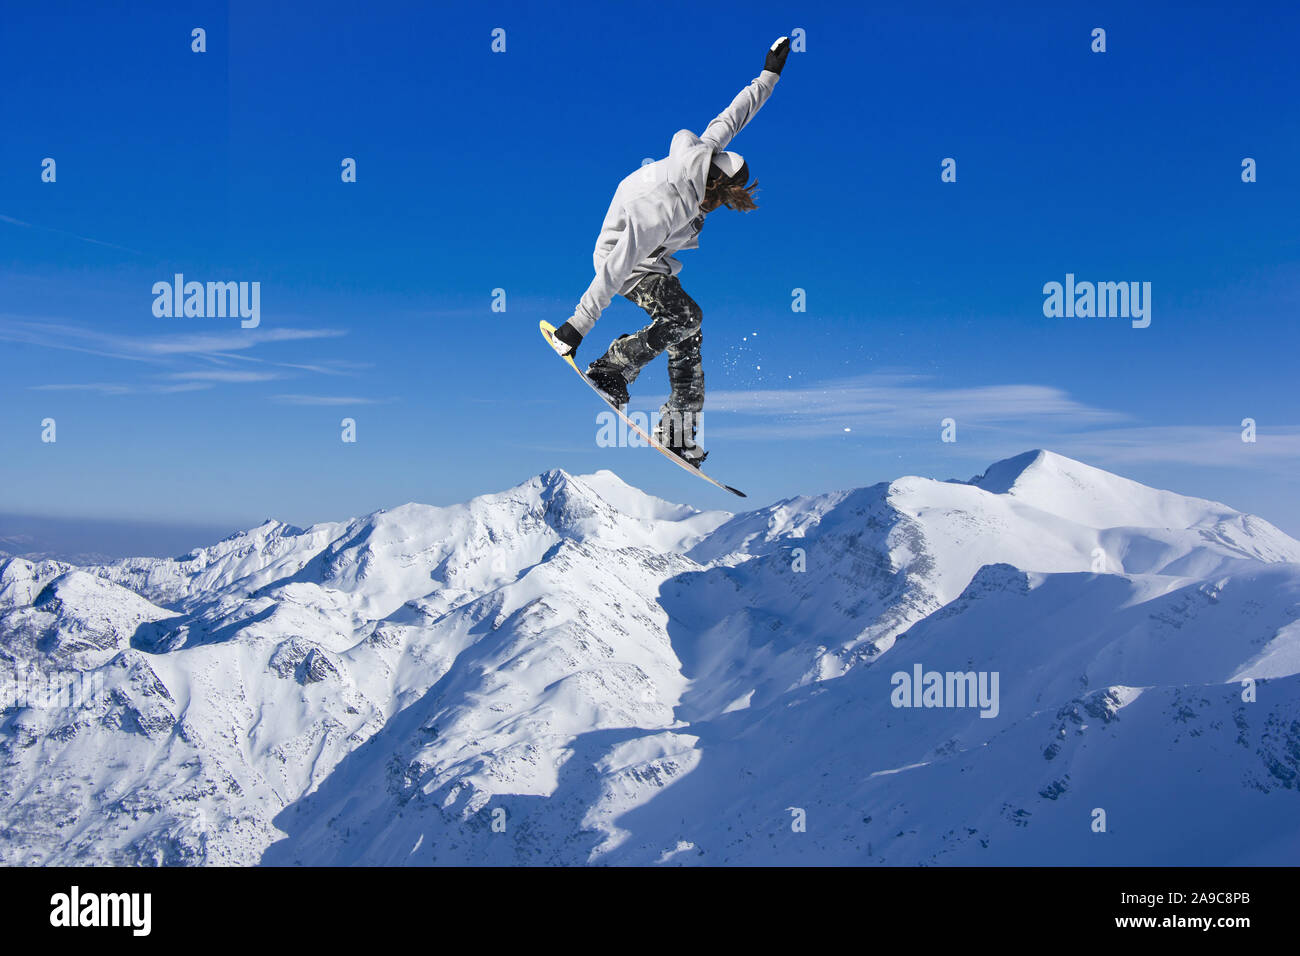 Skier Snowboarder jumping through air with blue sky in background Stock Photo